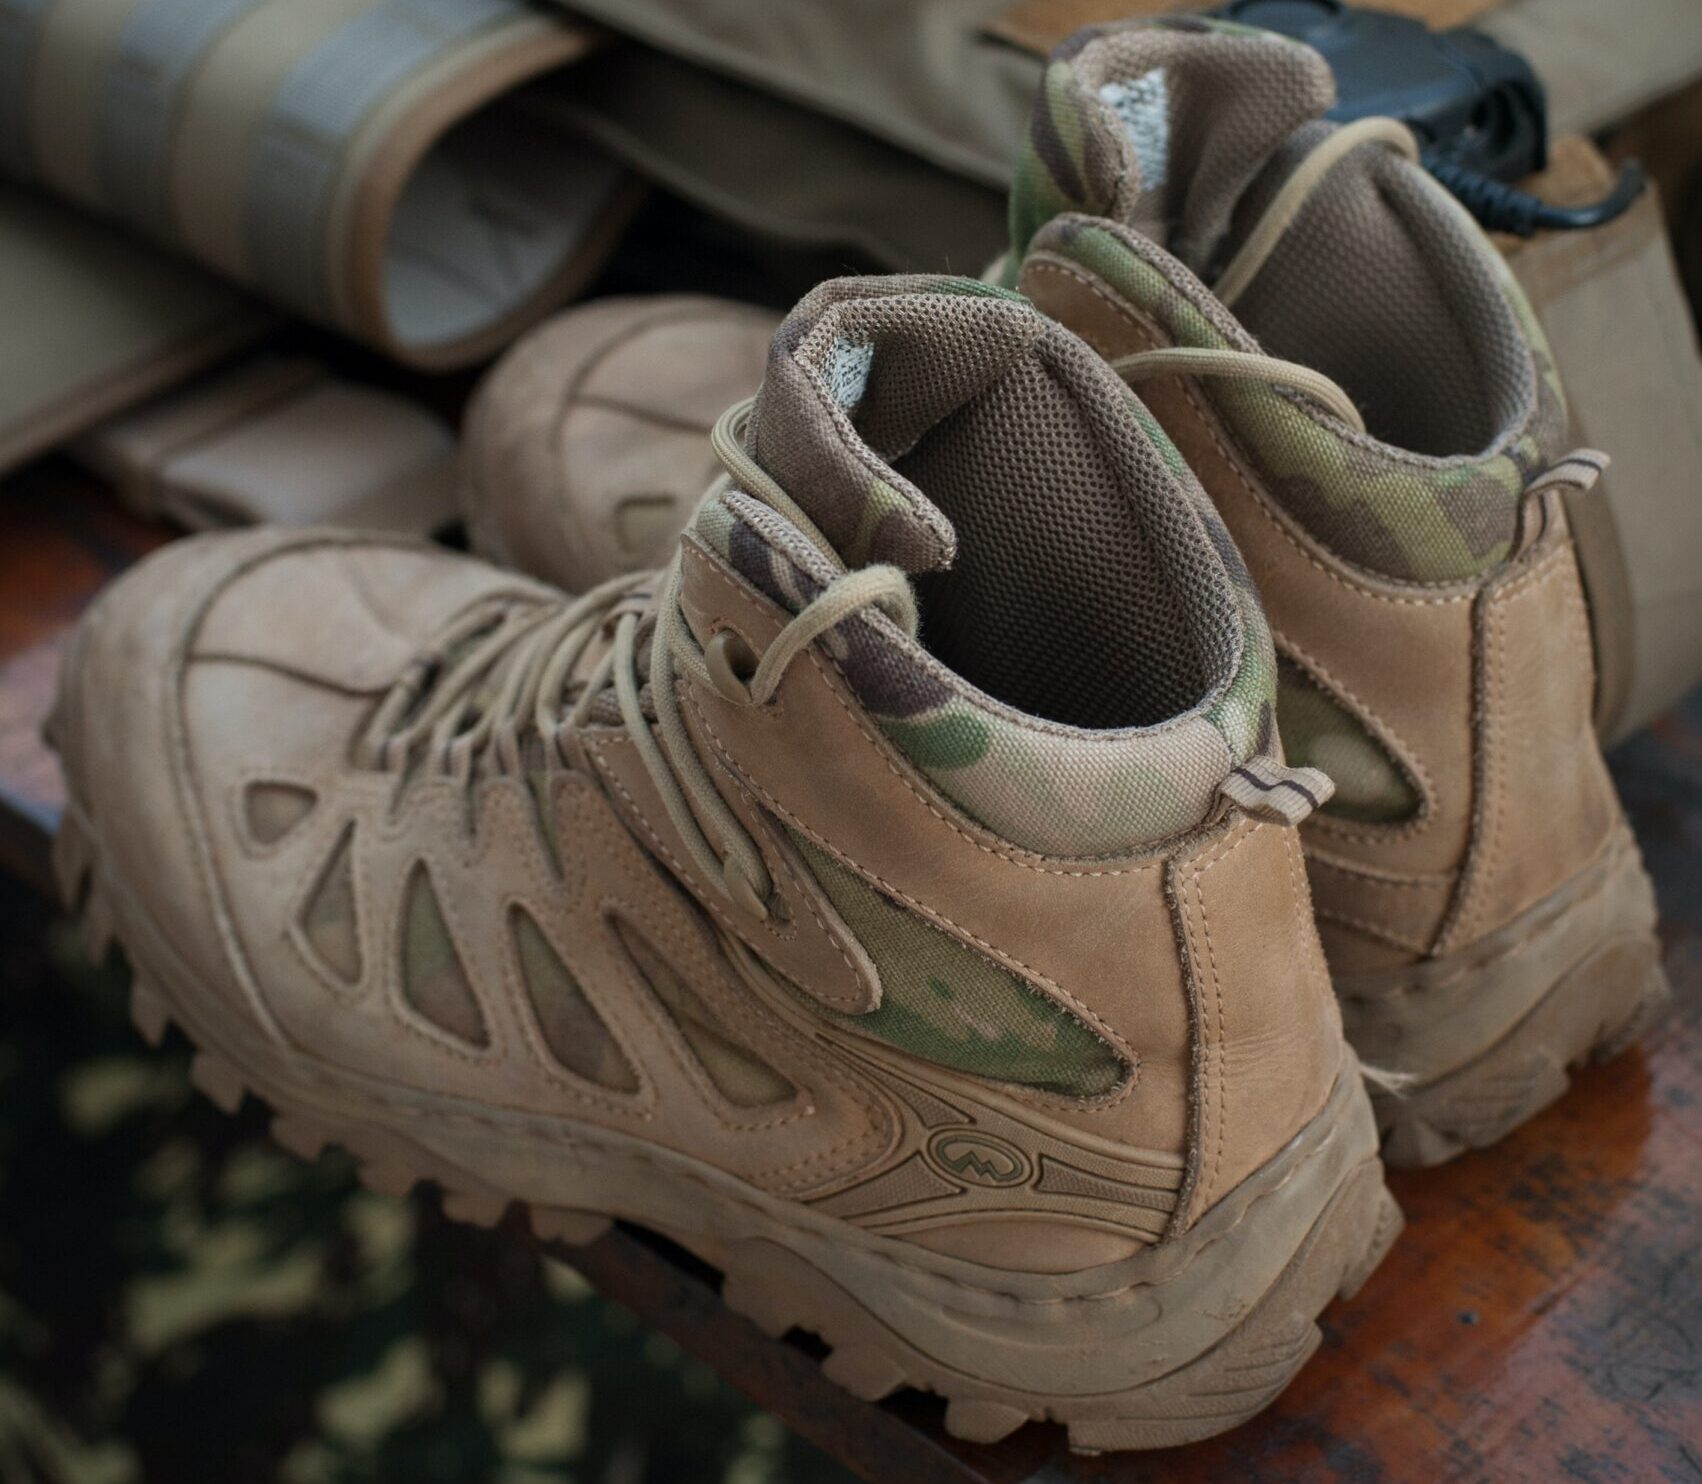 A military issue Gore-Tex hiking boot.